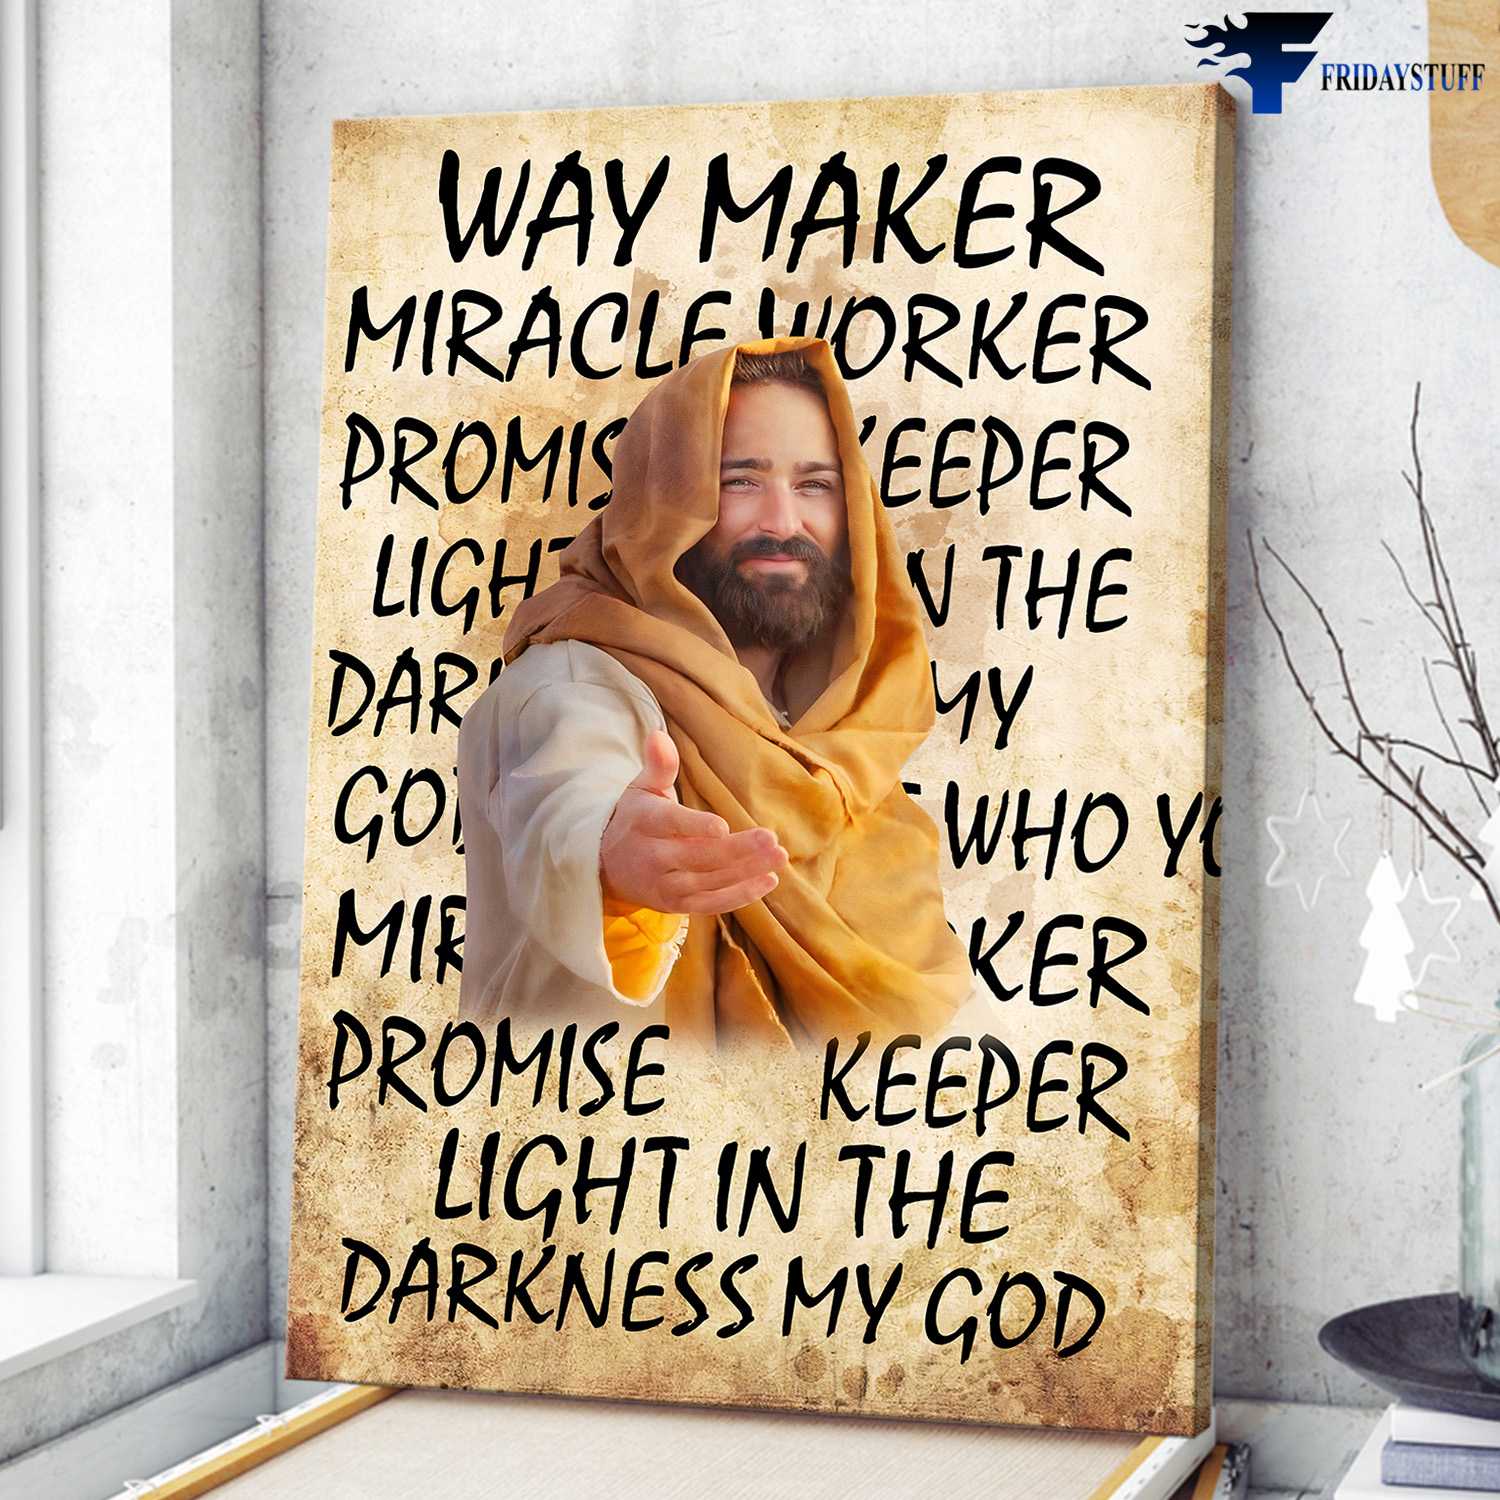 God Poster, Believe In God, Way Maker Miracle Worker, Promise Keeprt, Light In The Darkness My God